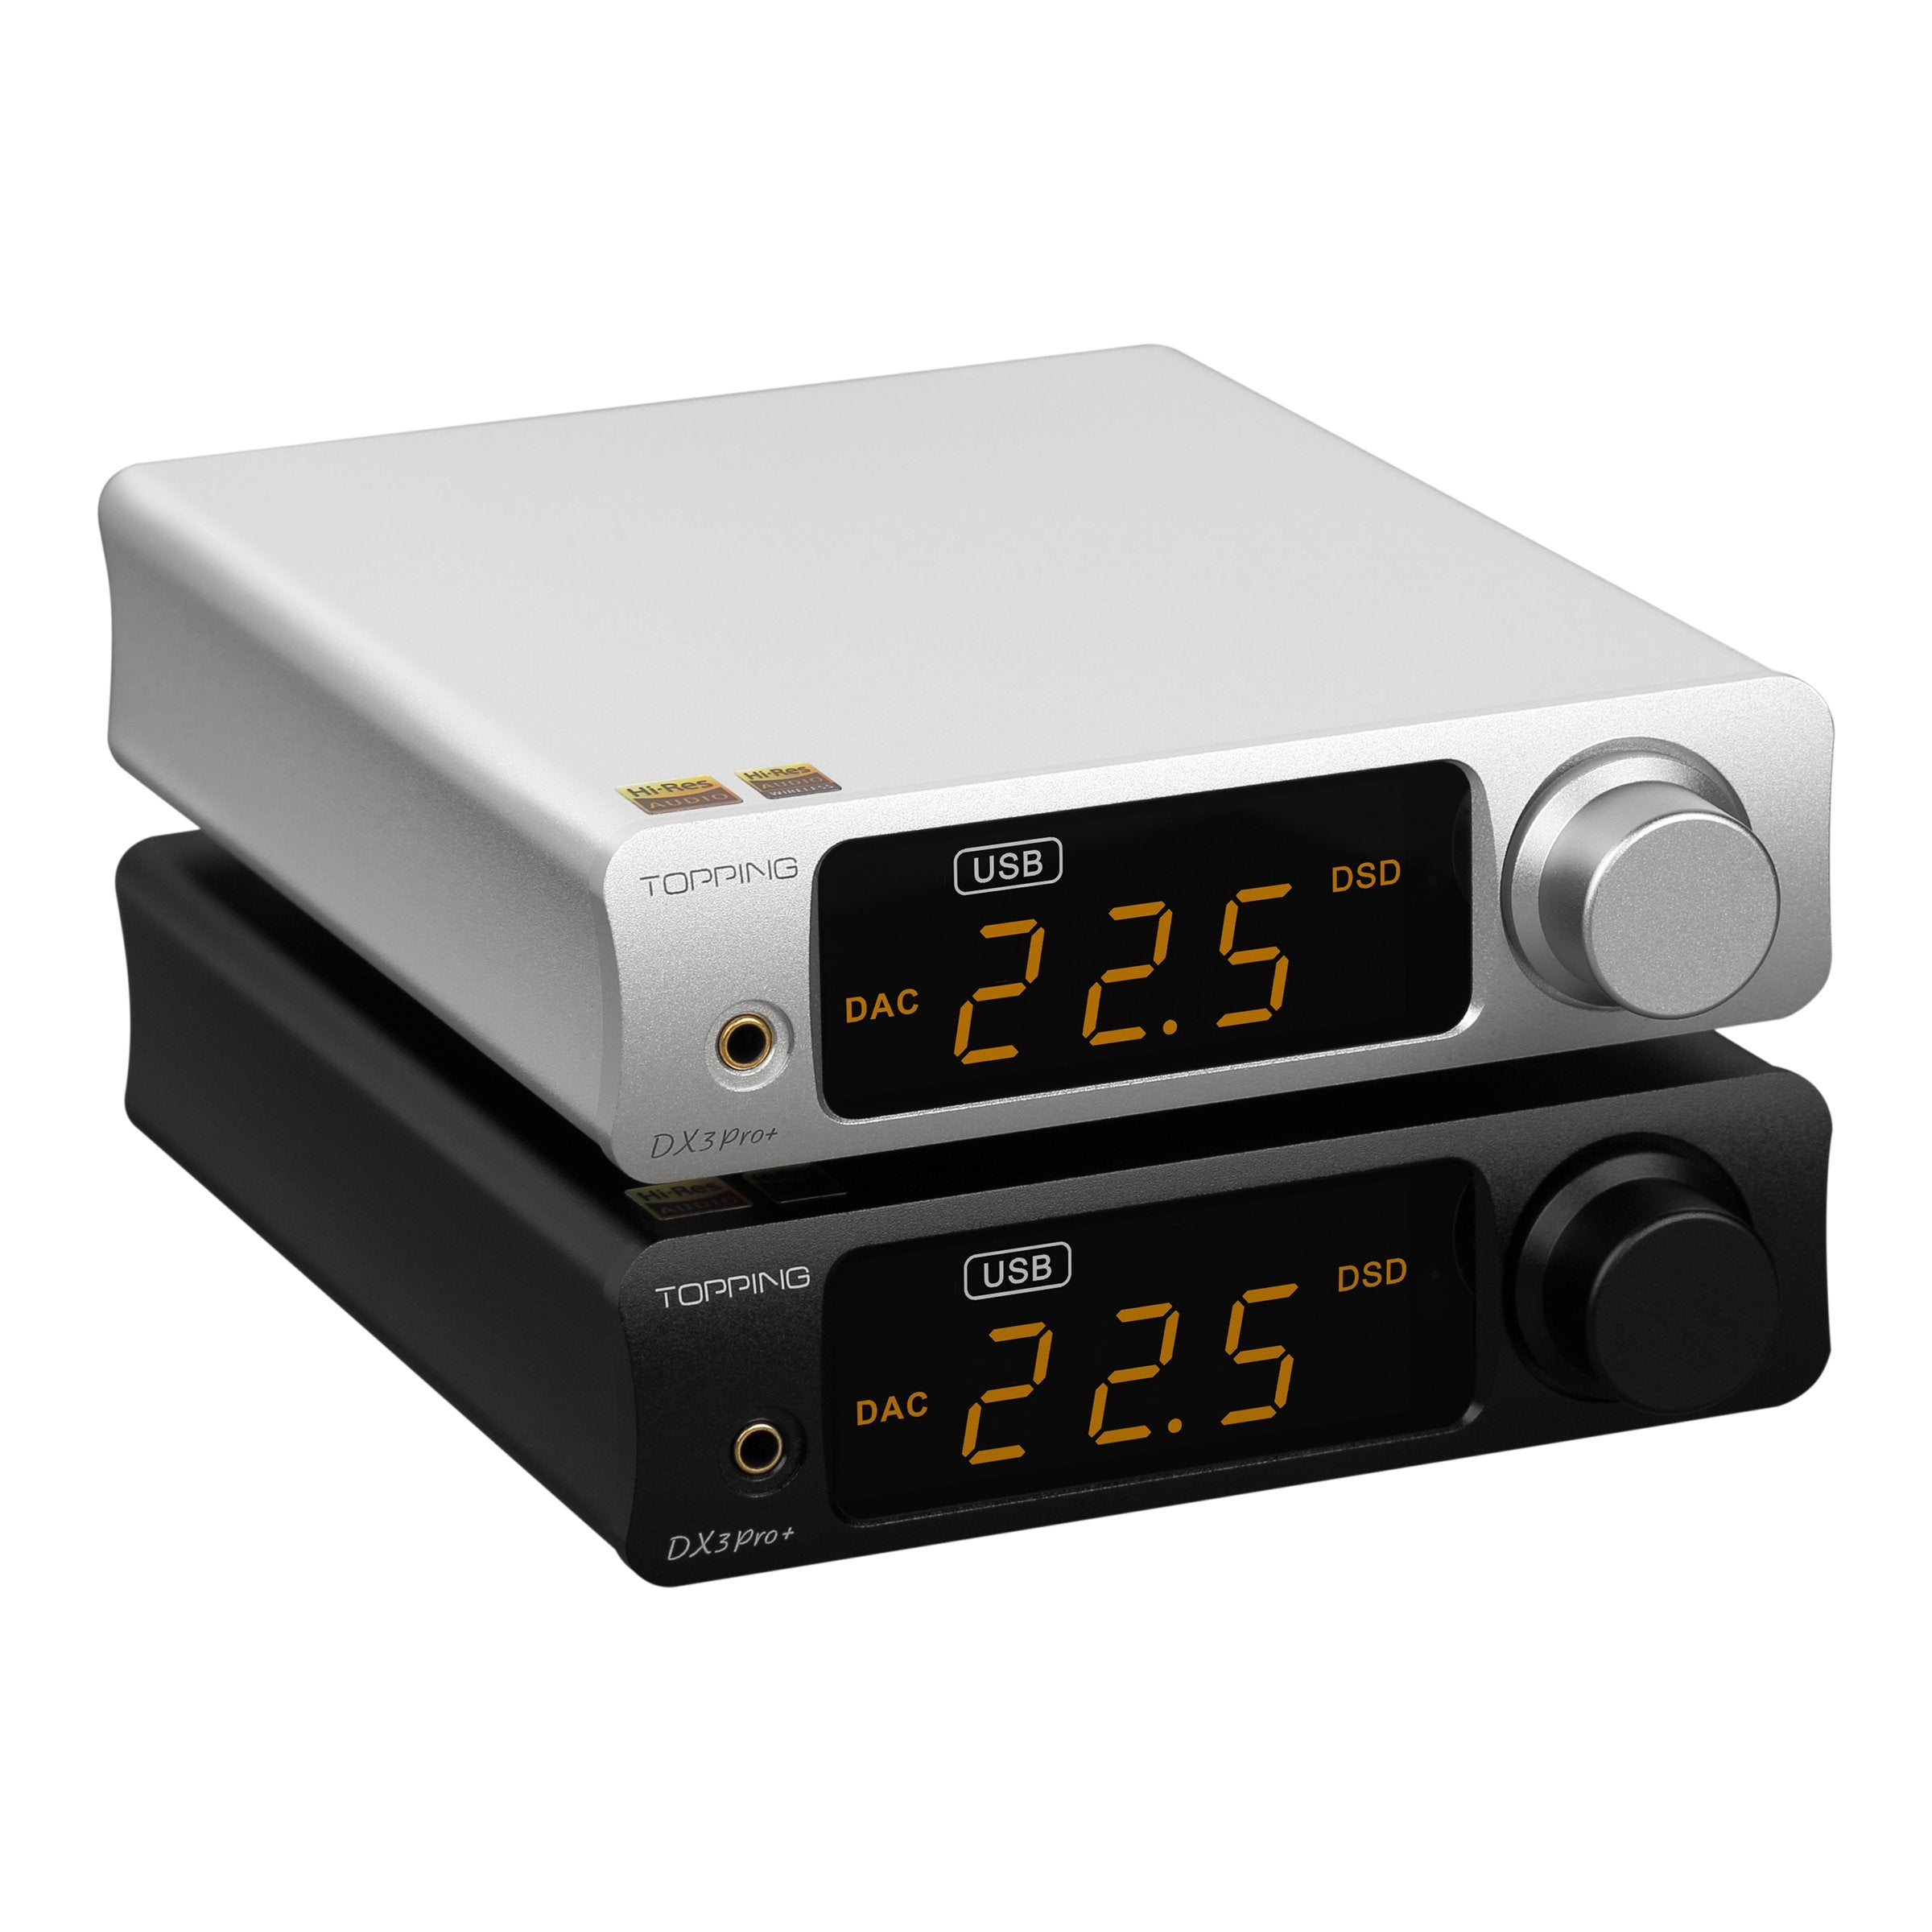 TOPPING DX3 Pro+ Bluetooth DAC/Amp – Audio